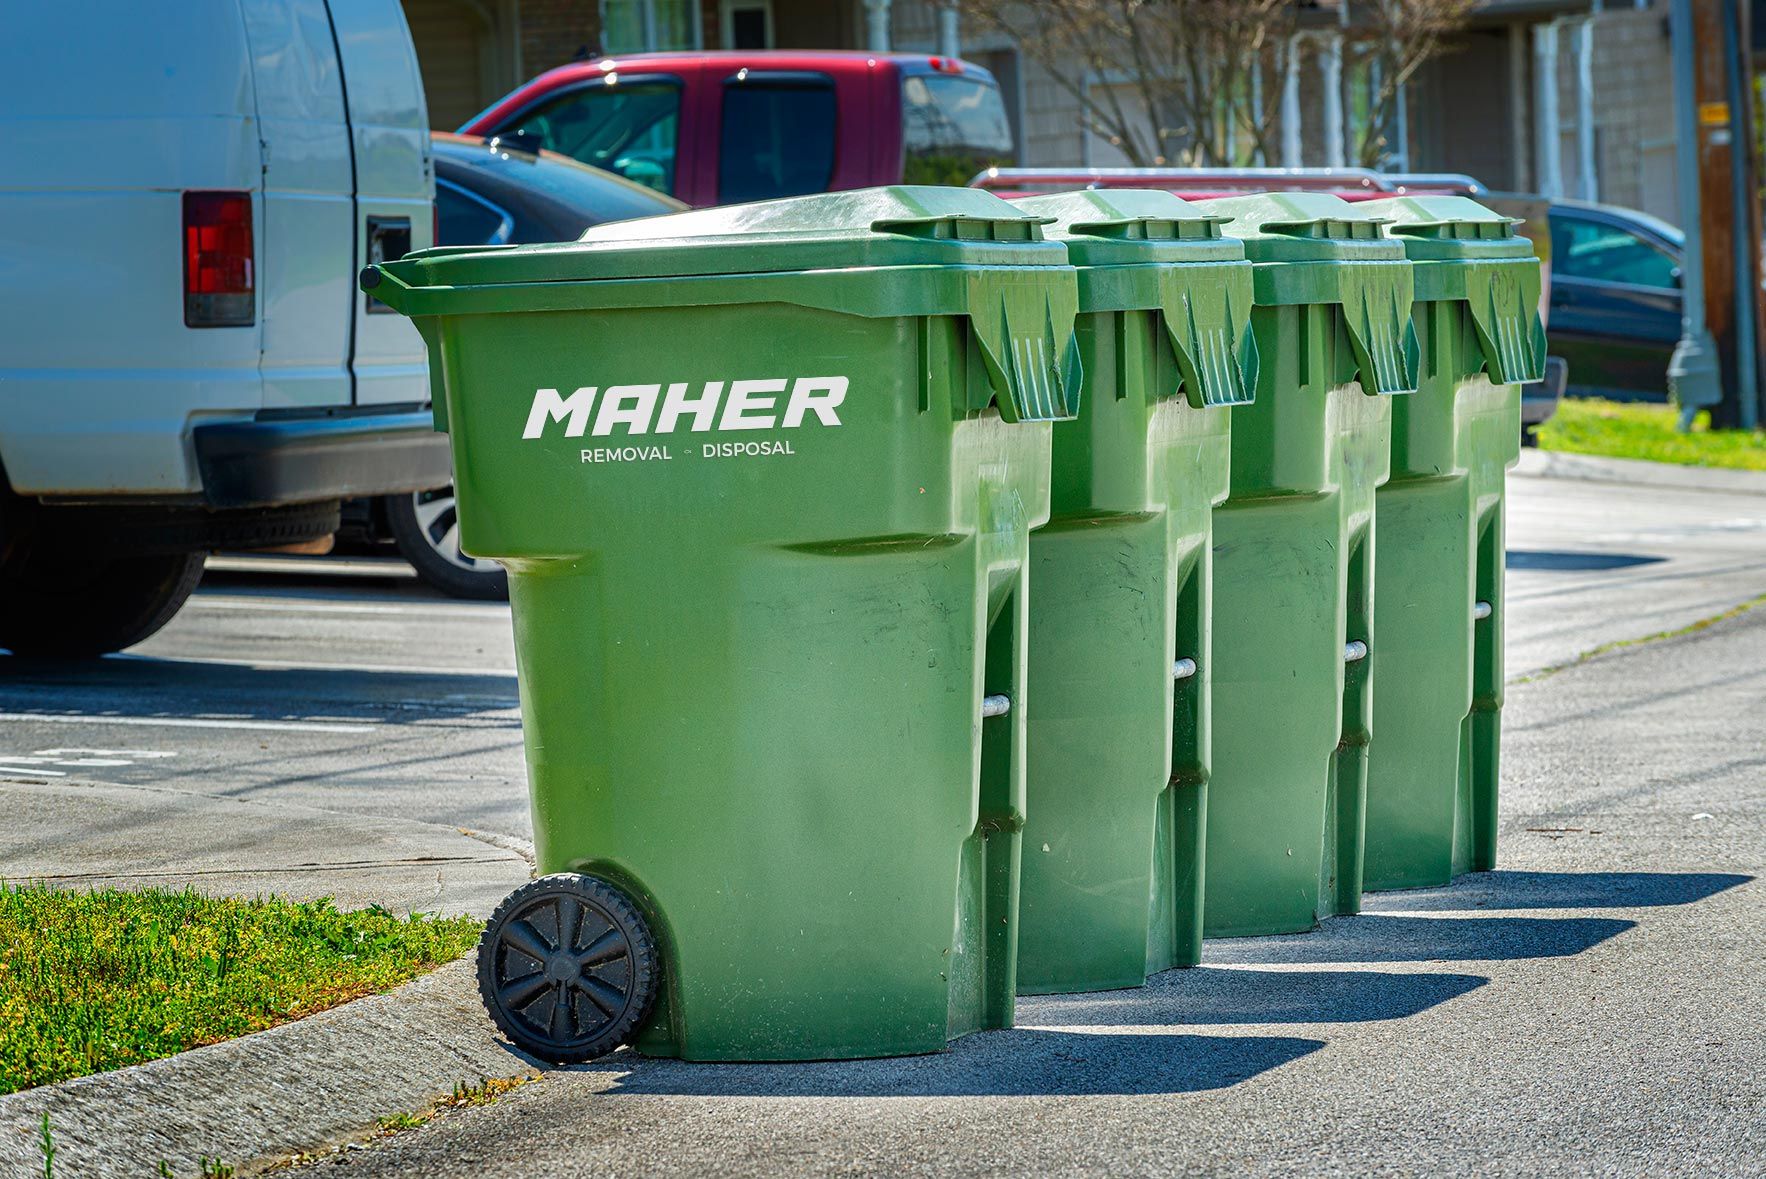 Maher Removal & Disposal offers residential trash pickup & recycling services.